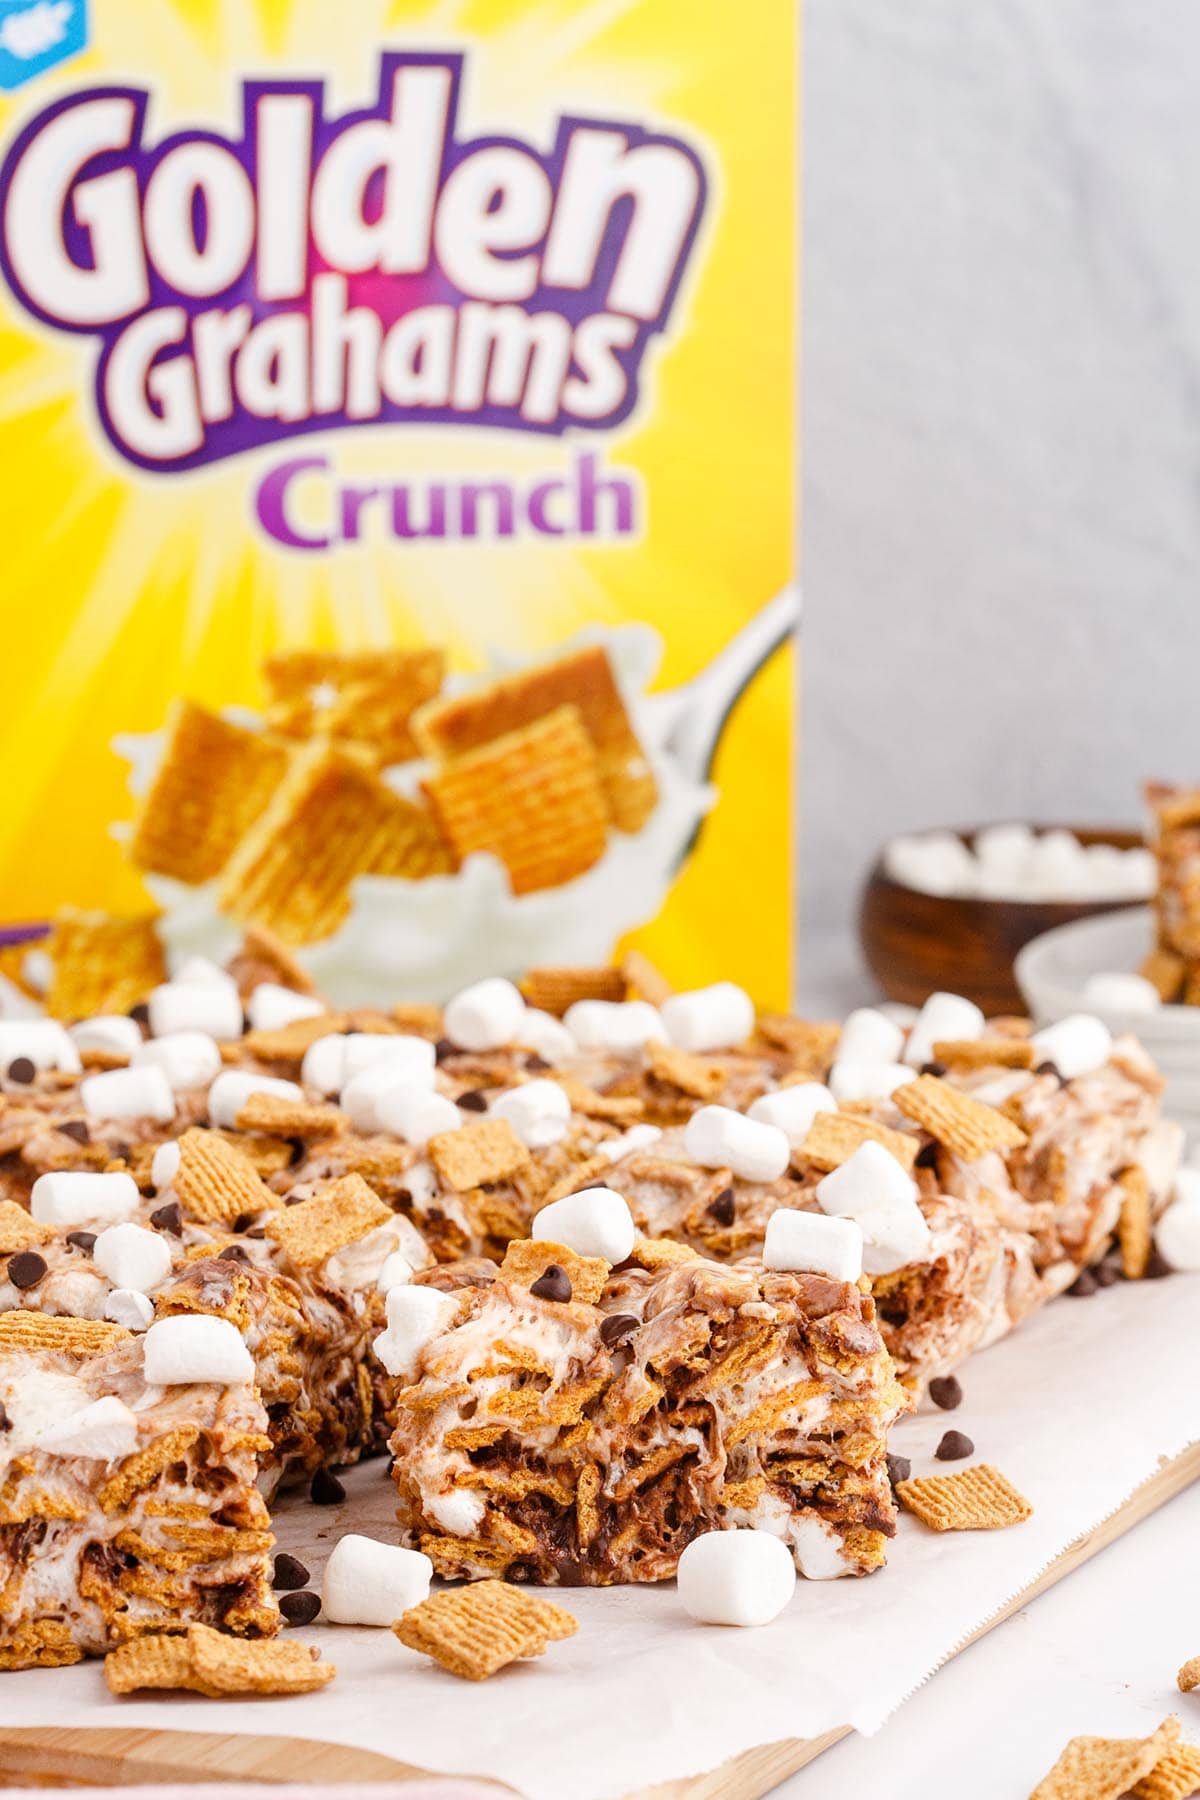 smores treats with golden graham crunch